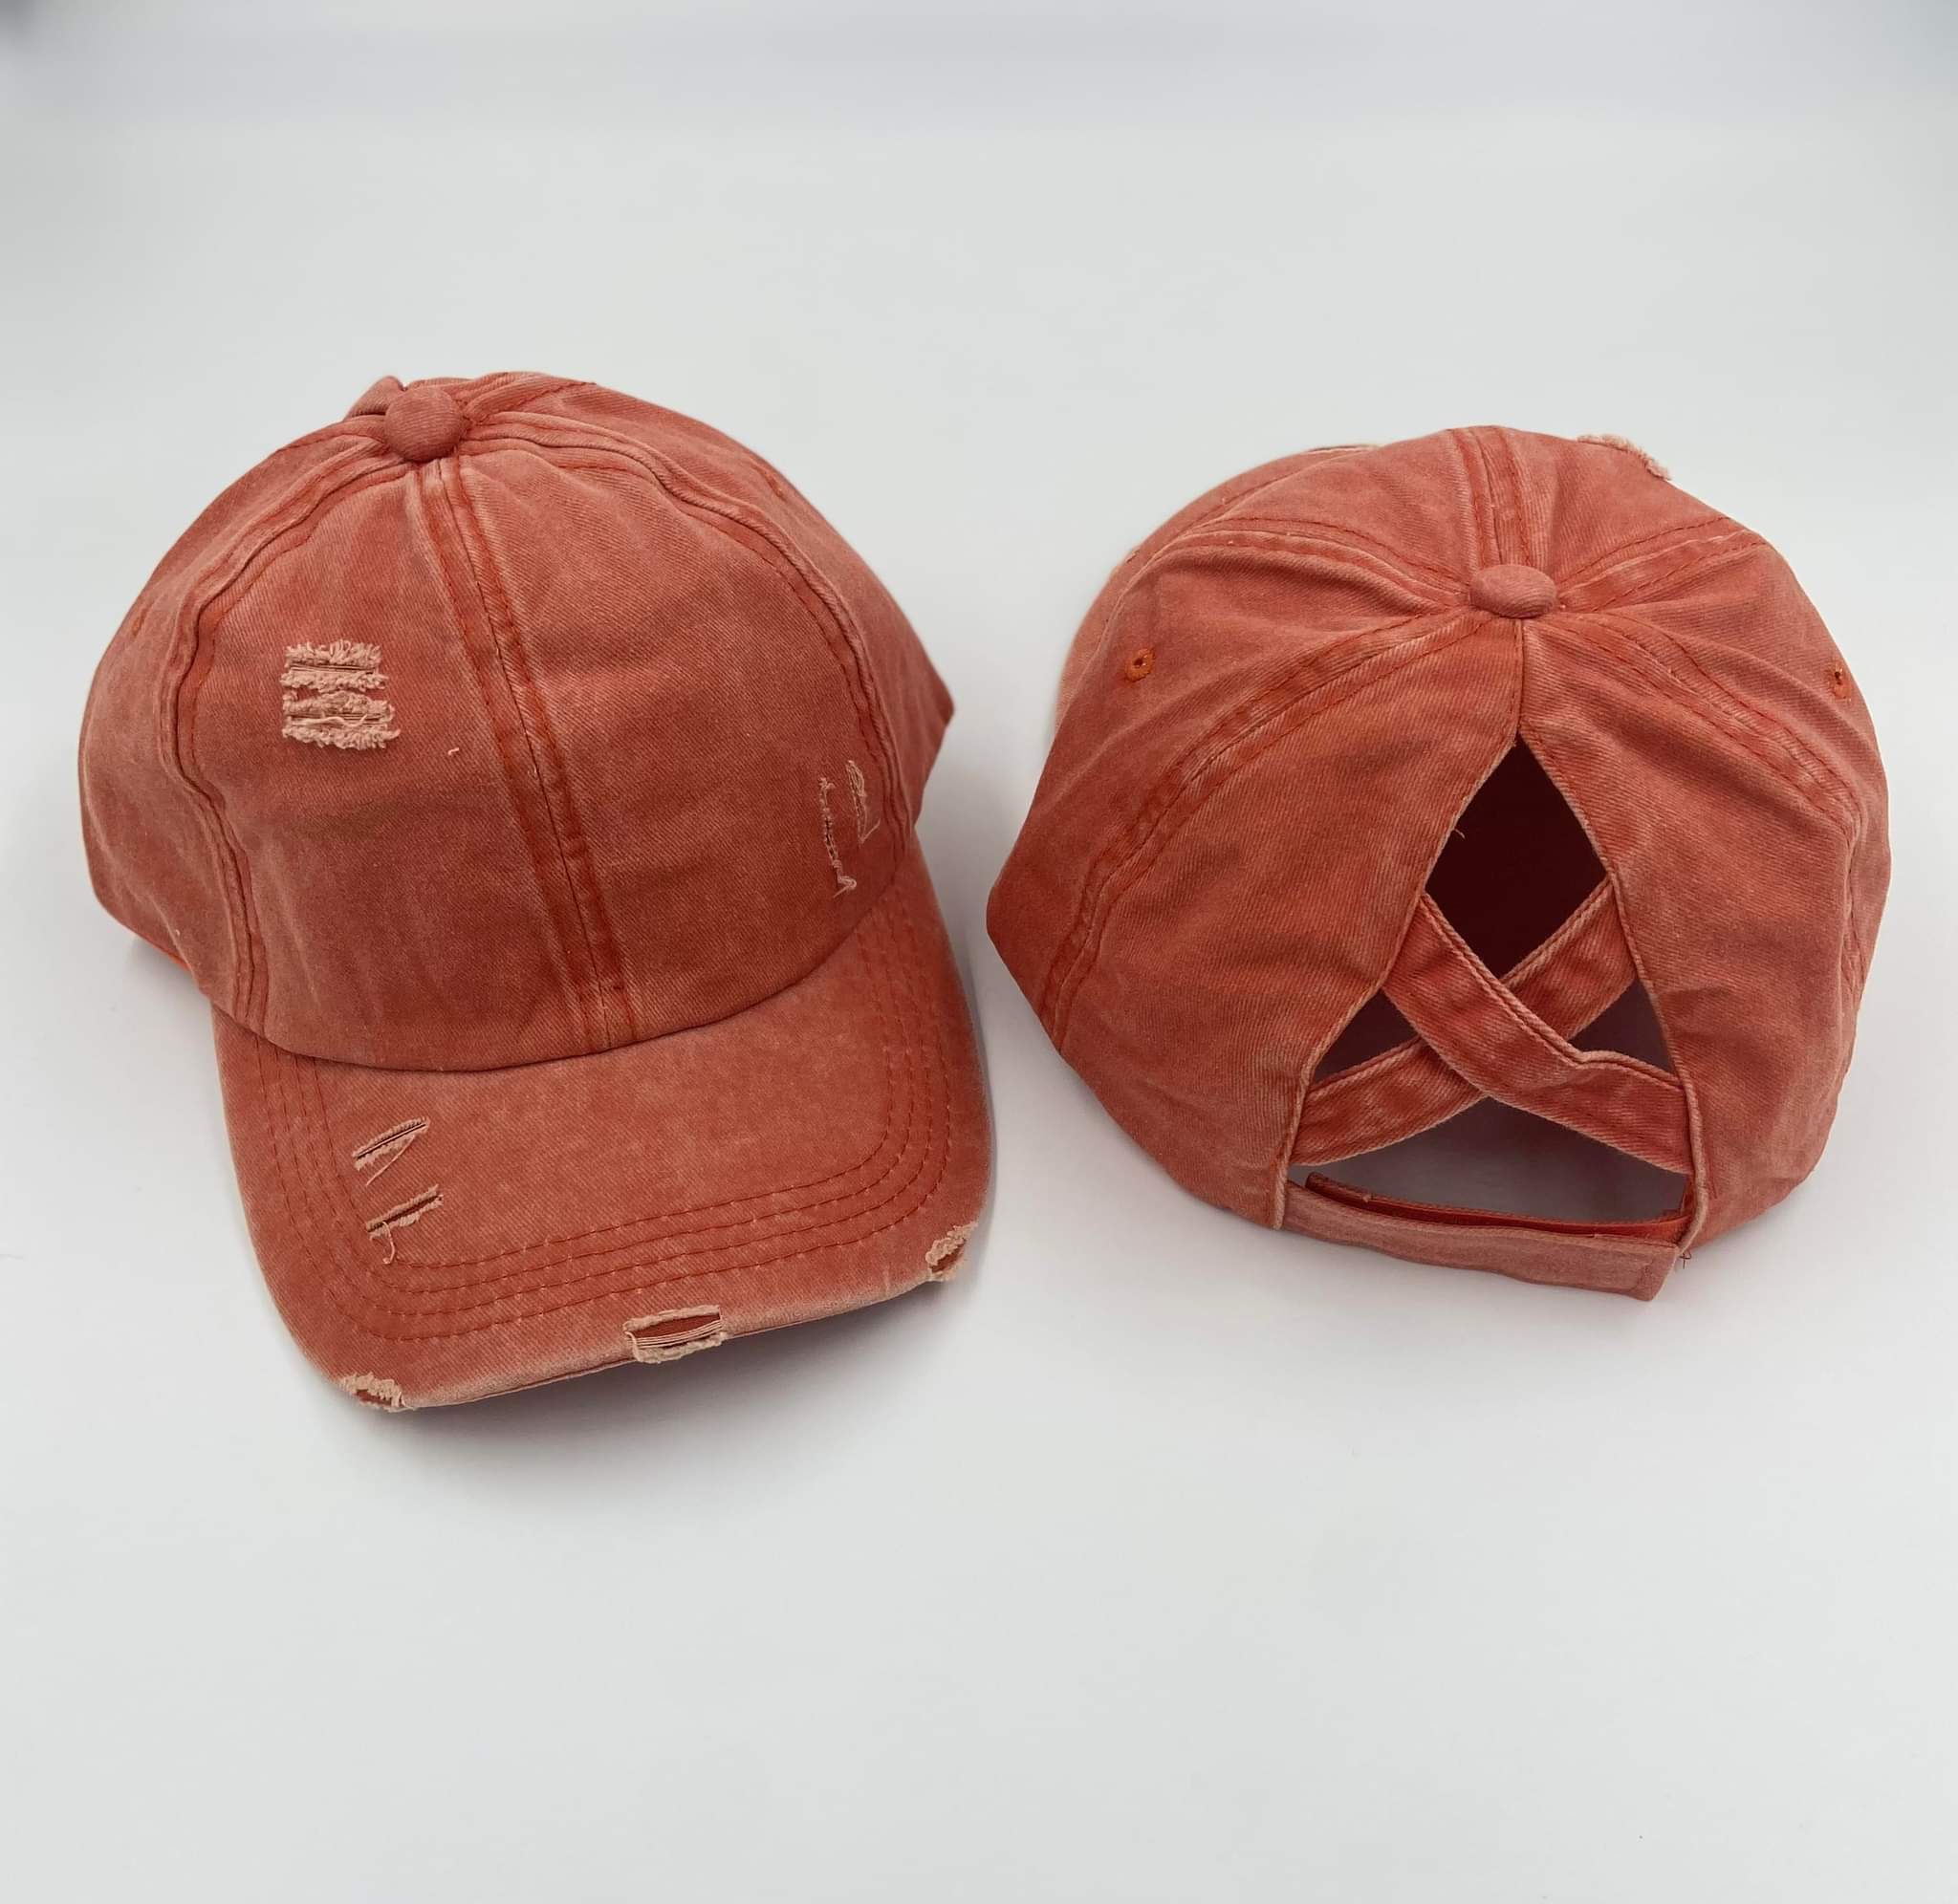 Orange Distressed Cotton Criss Criss Ponytail Hat - Gals and Dogs Boutique Limited